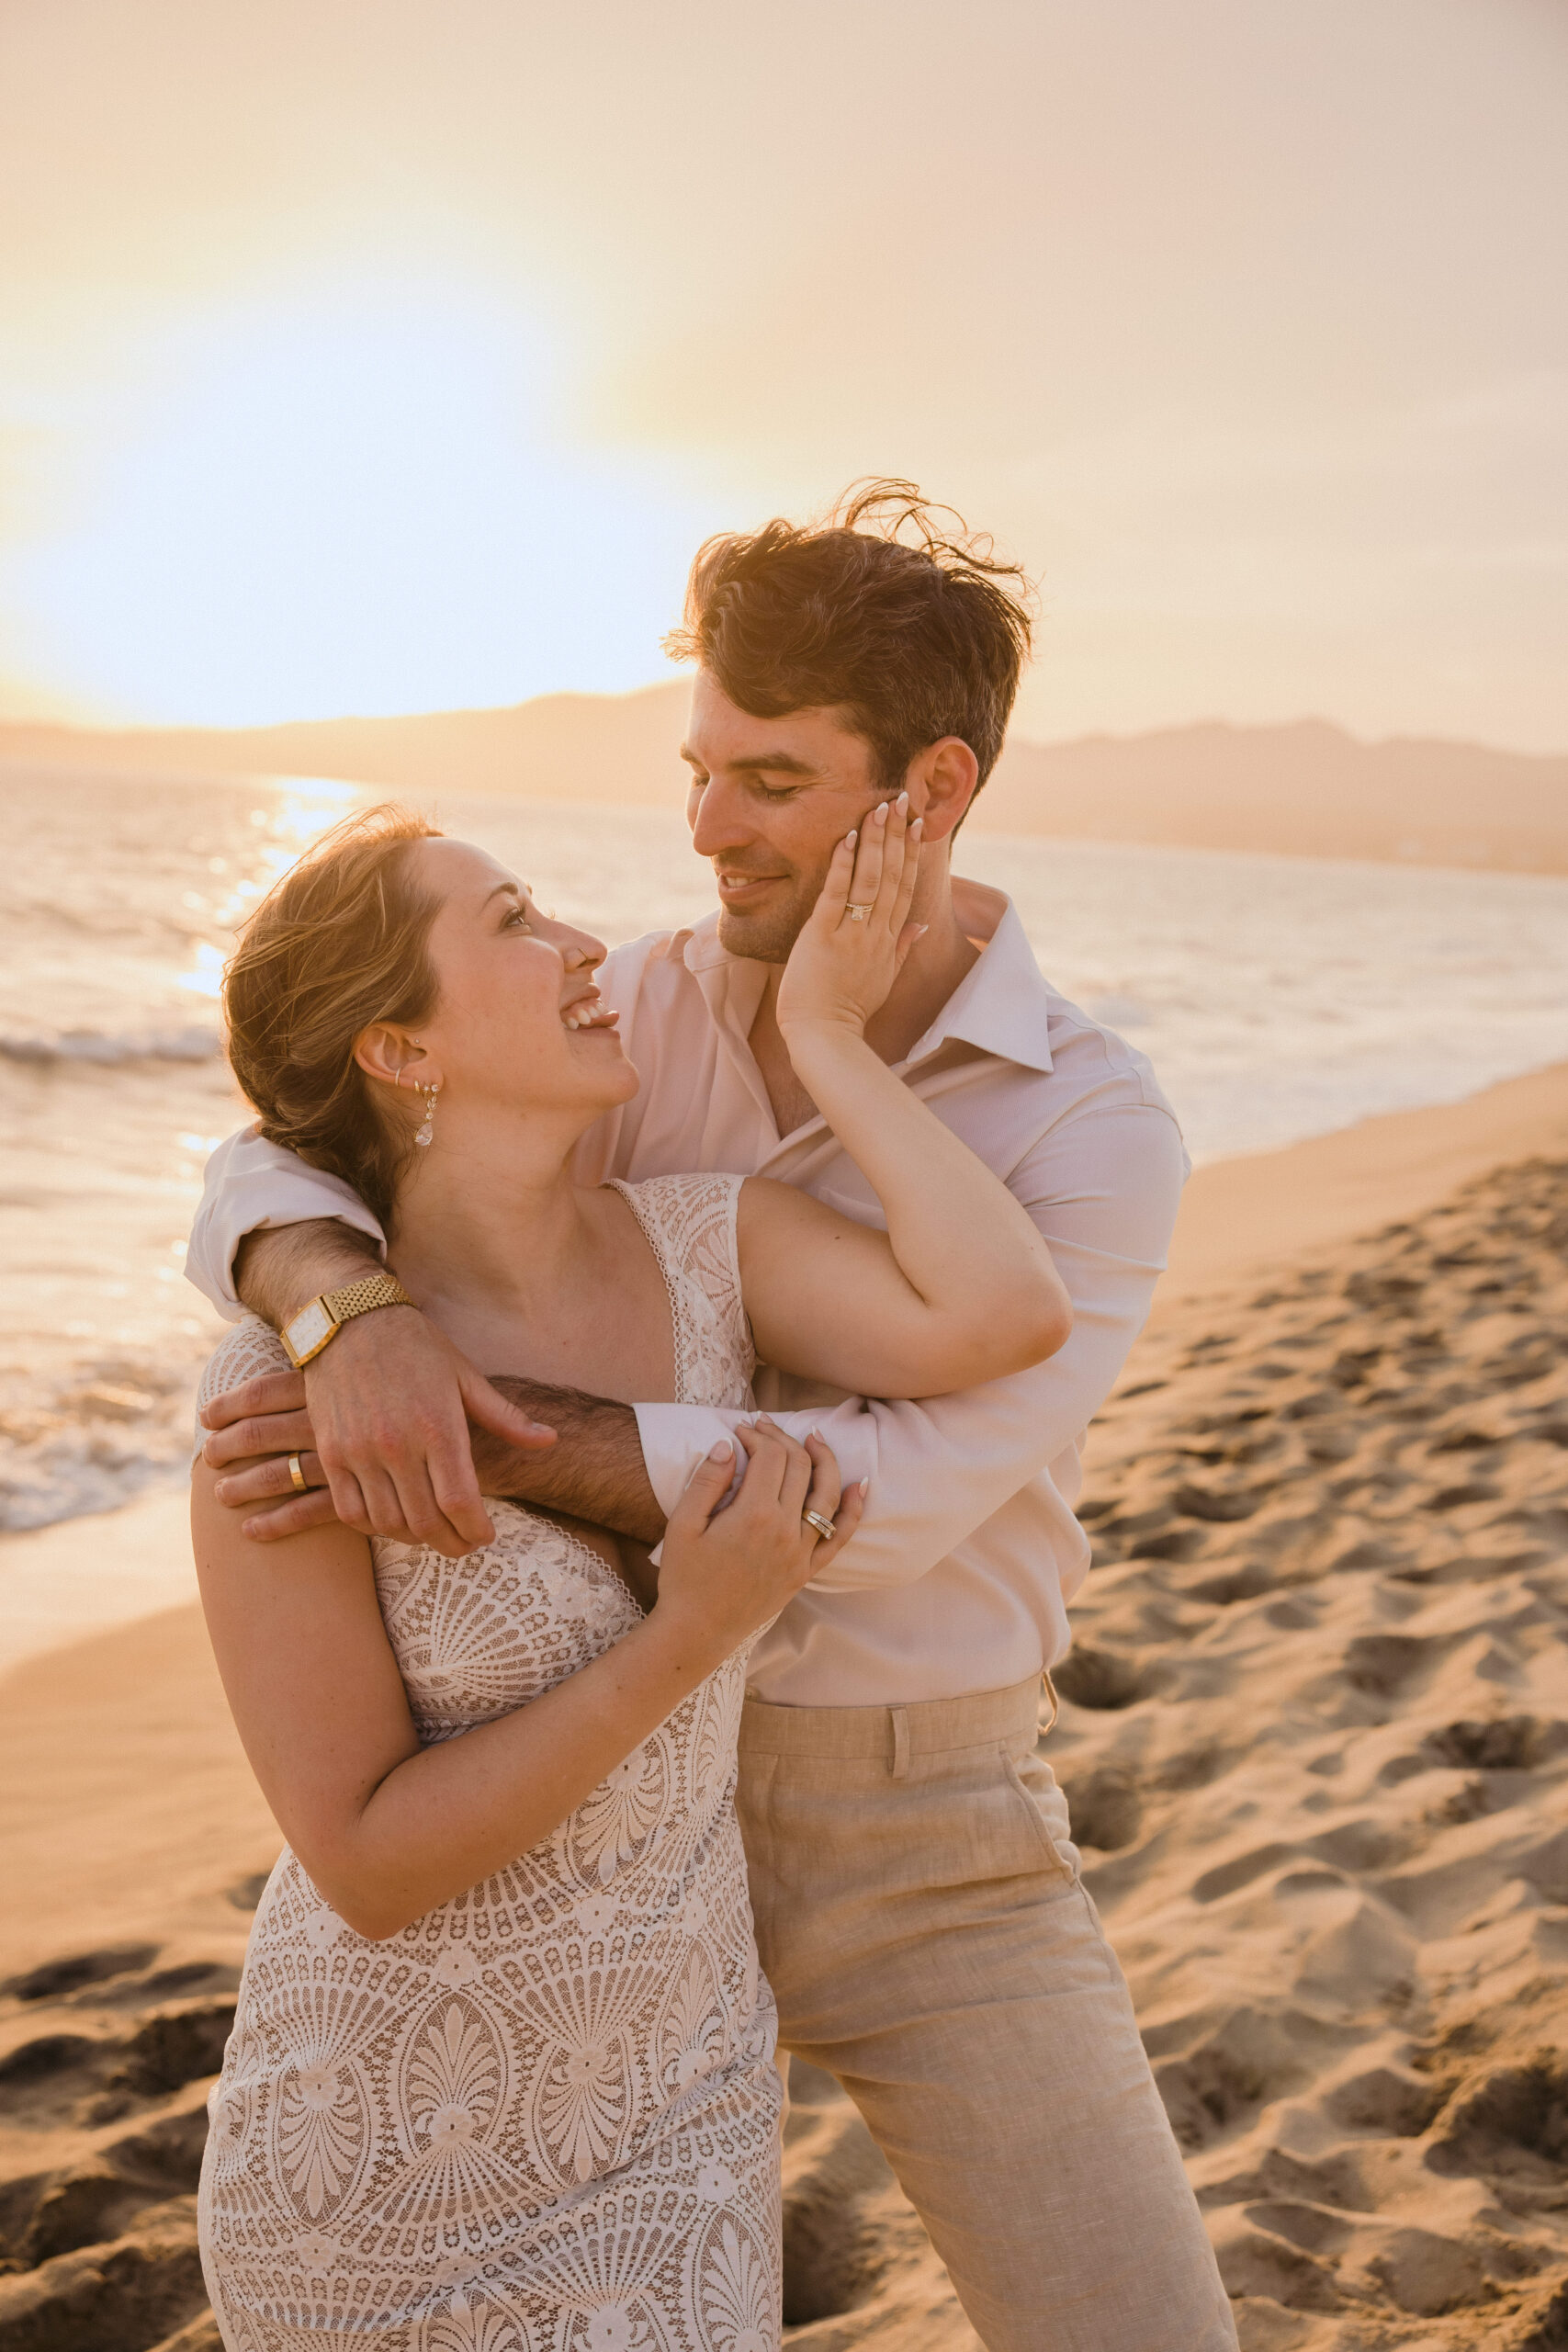 bride and groom hugging each other on beach at sunset.